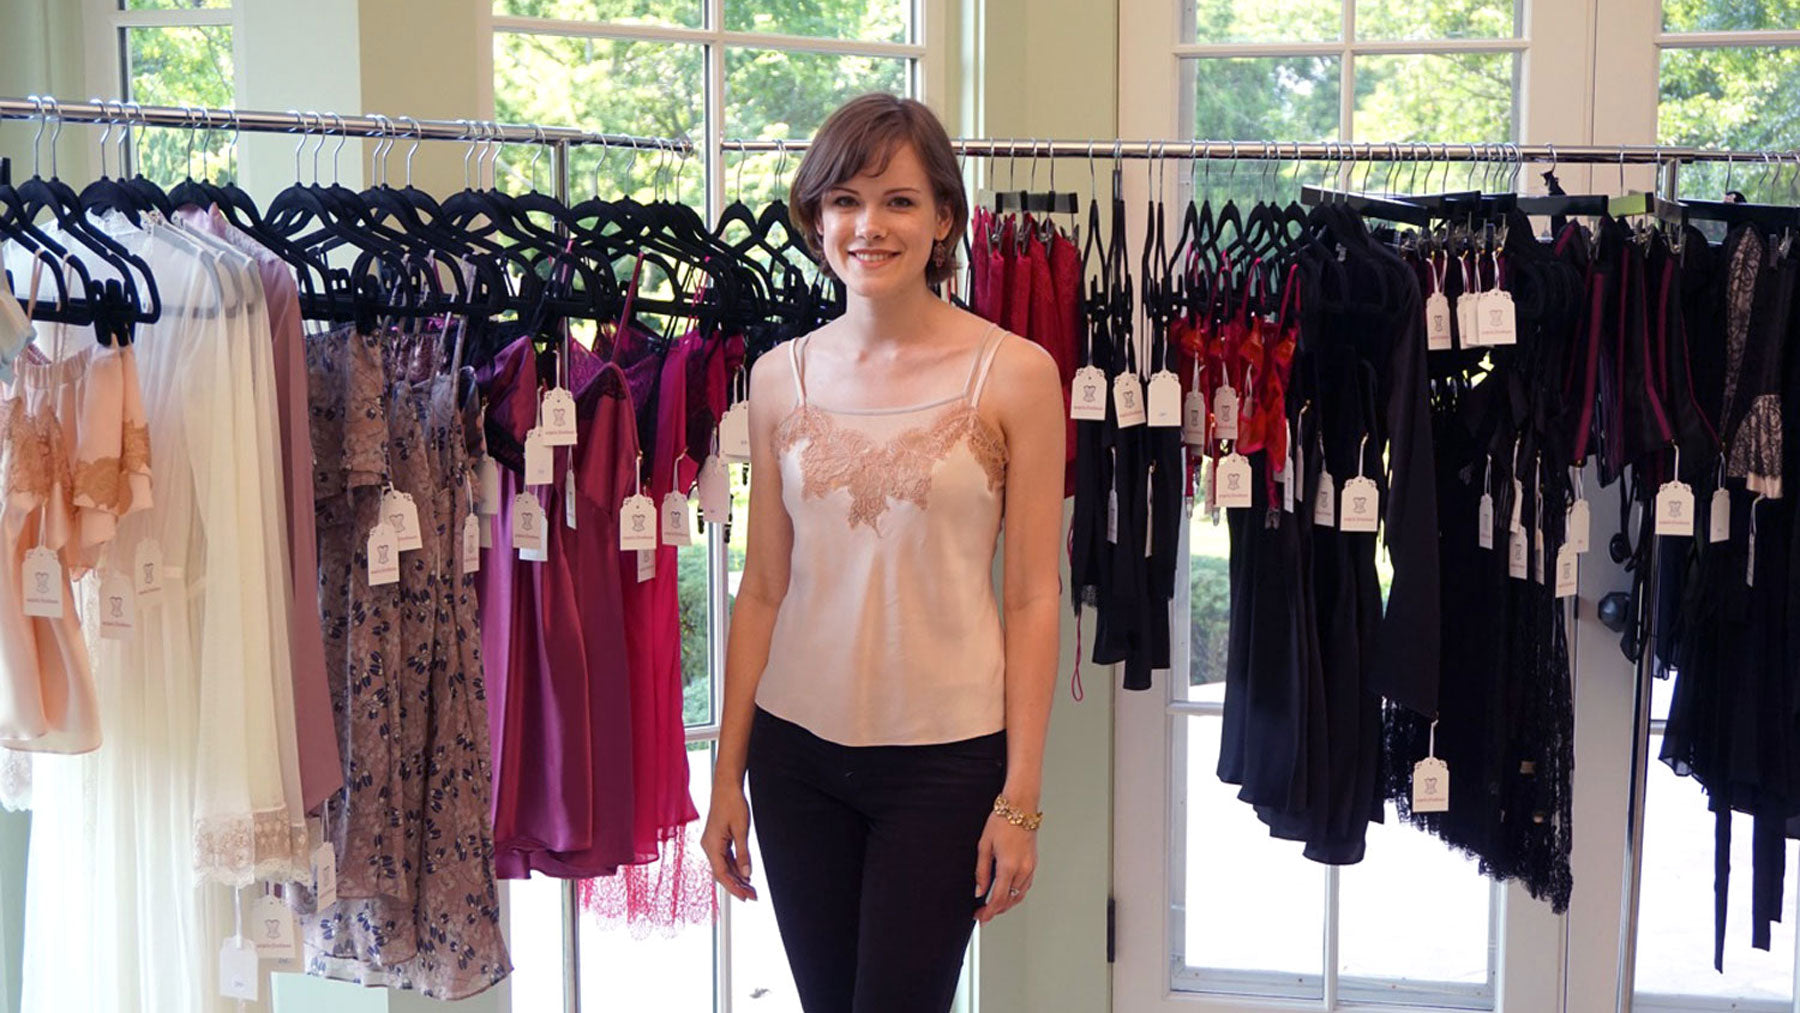 Angela Friedman lingerie Trunk shows, Private shopping, and Pop-up shops